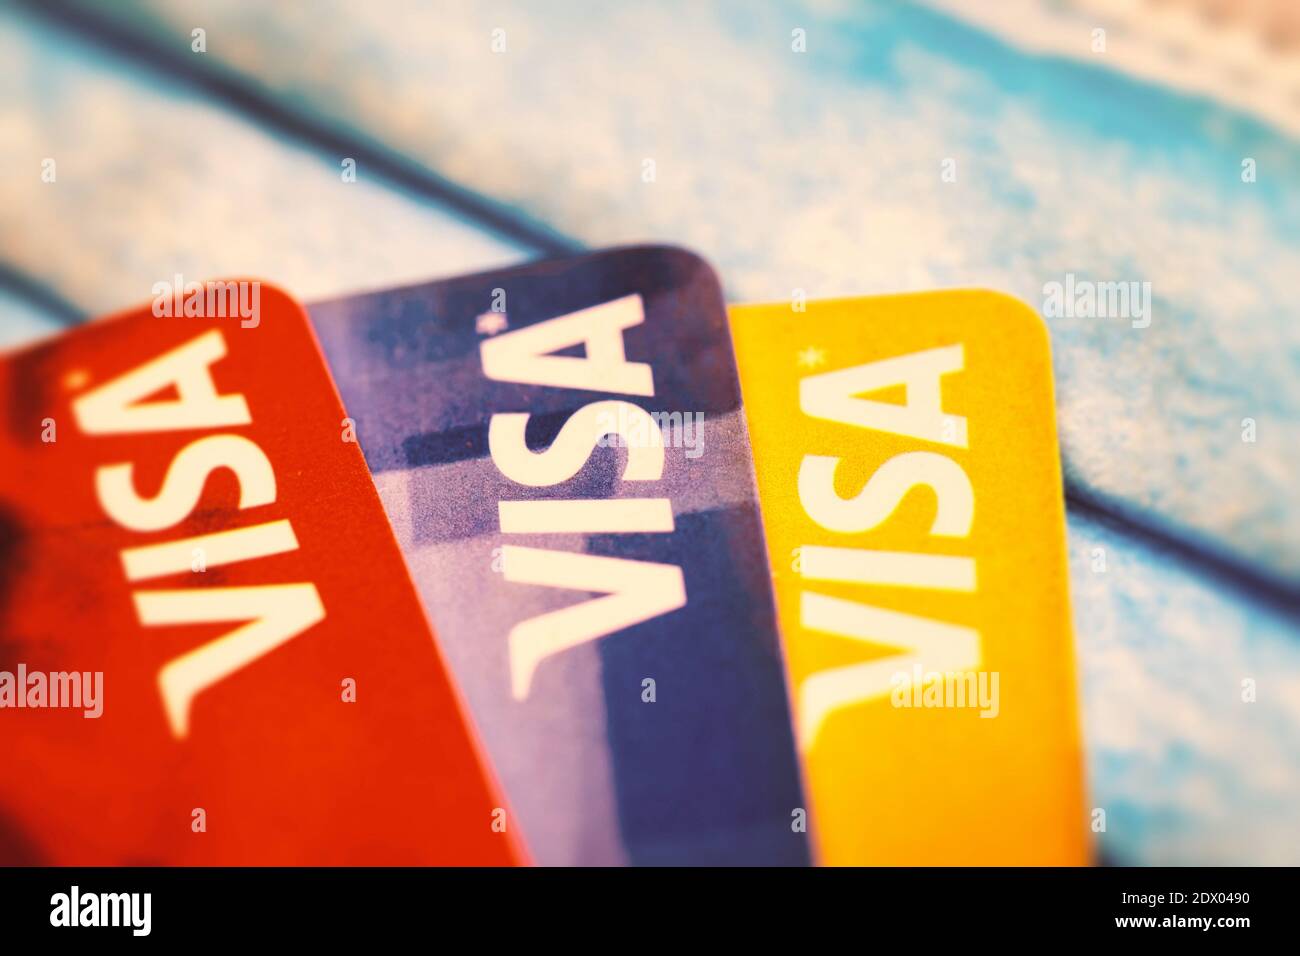 Visa Credit Cards over a protective face mask. A concept of debt during the Covid-19 pandemic Stock Photo